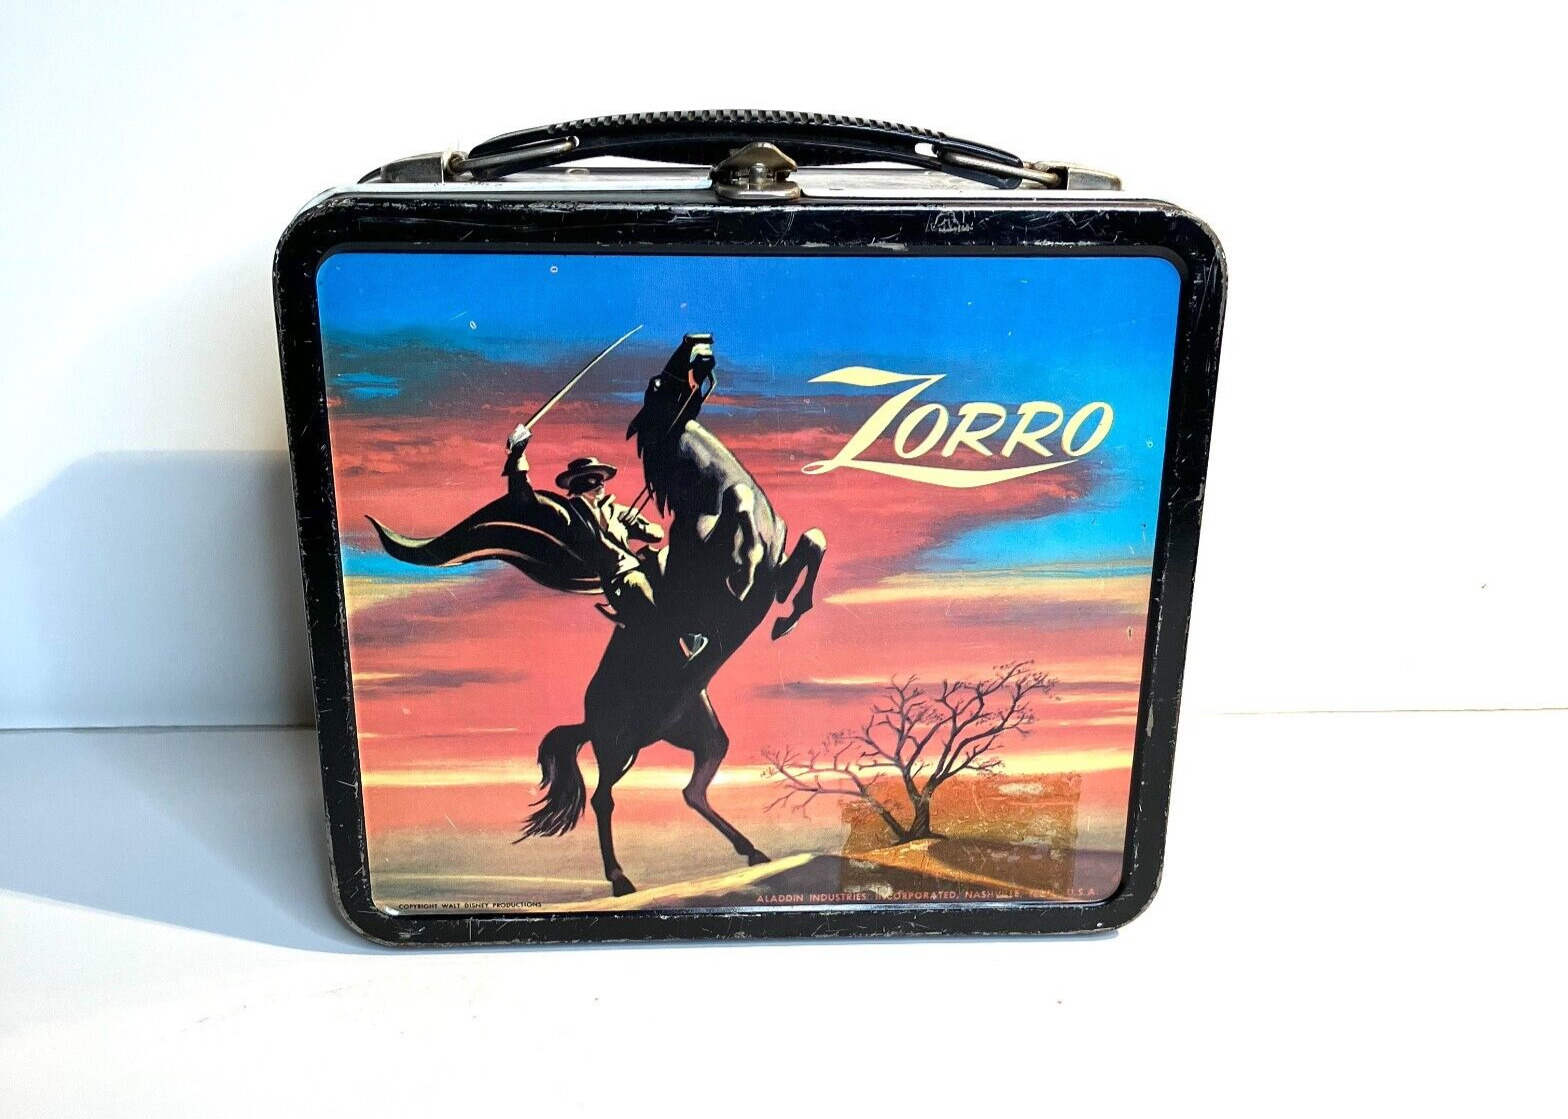 1958 Vintage Zorro Metal Lunch Box: With Thermos, Walt Disney Productions